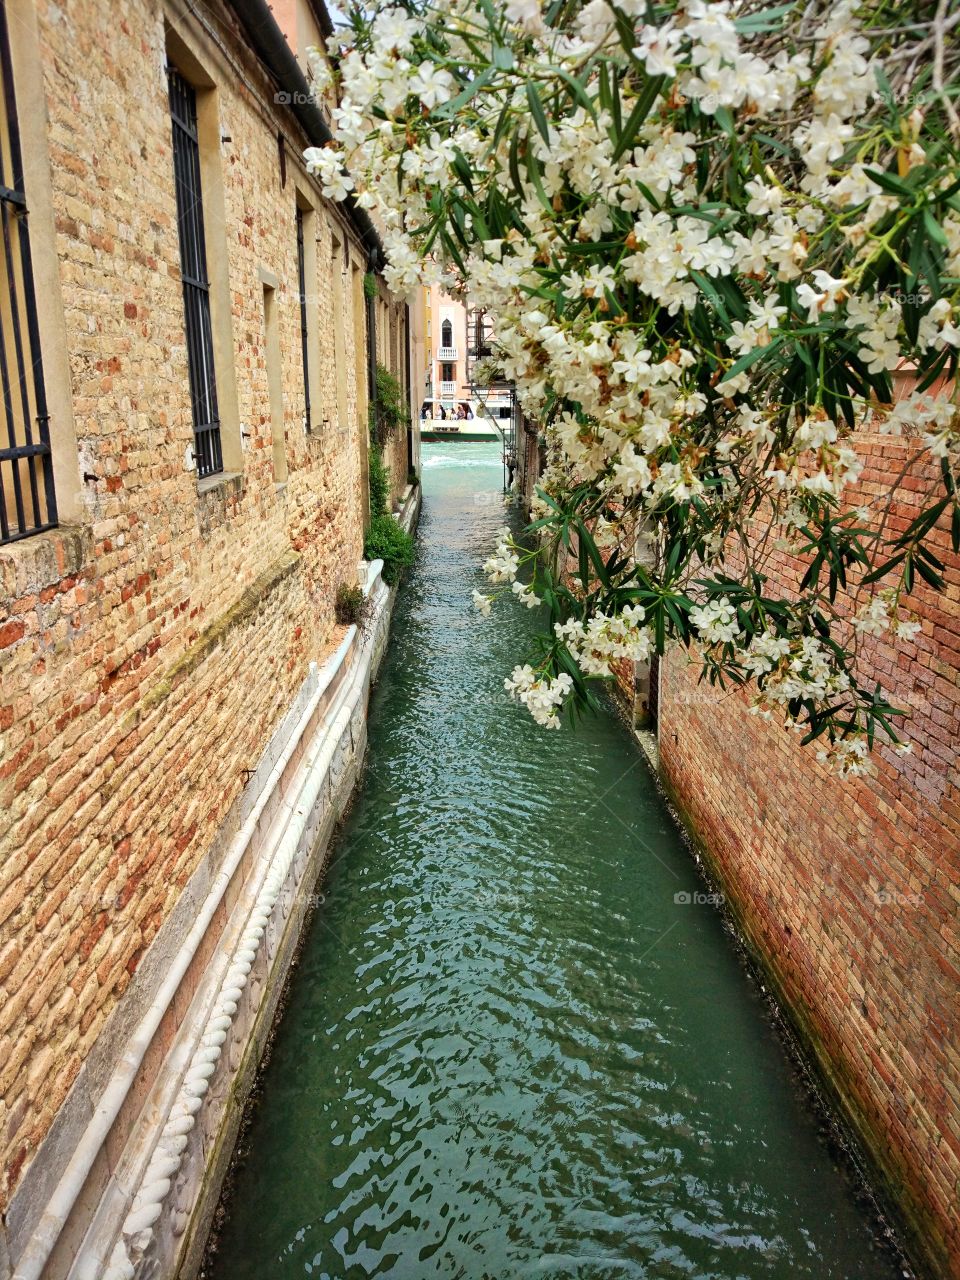 Channel in Venice, Italy